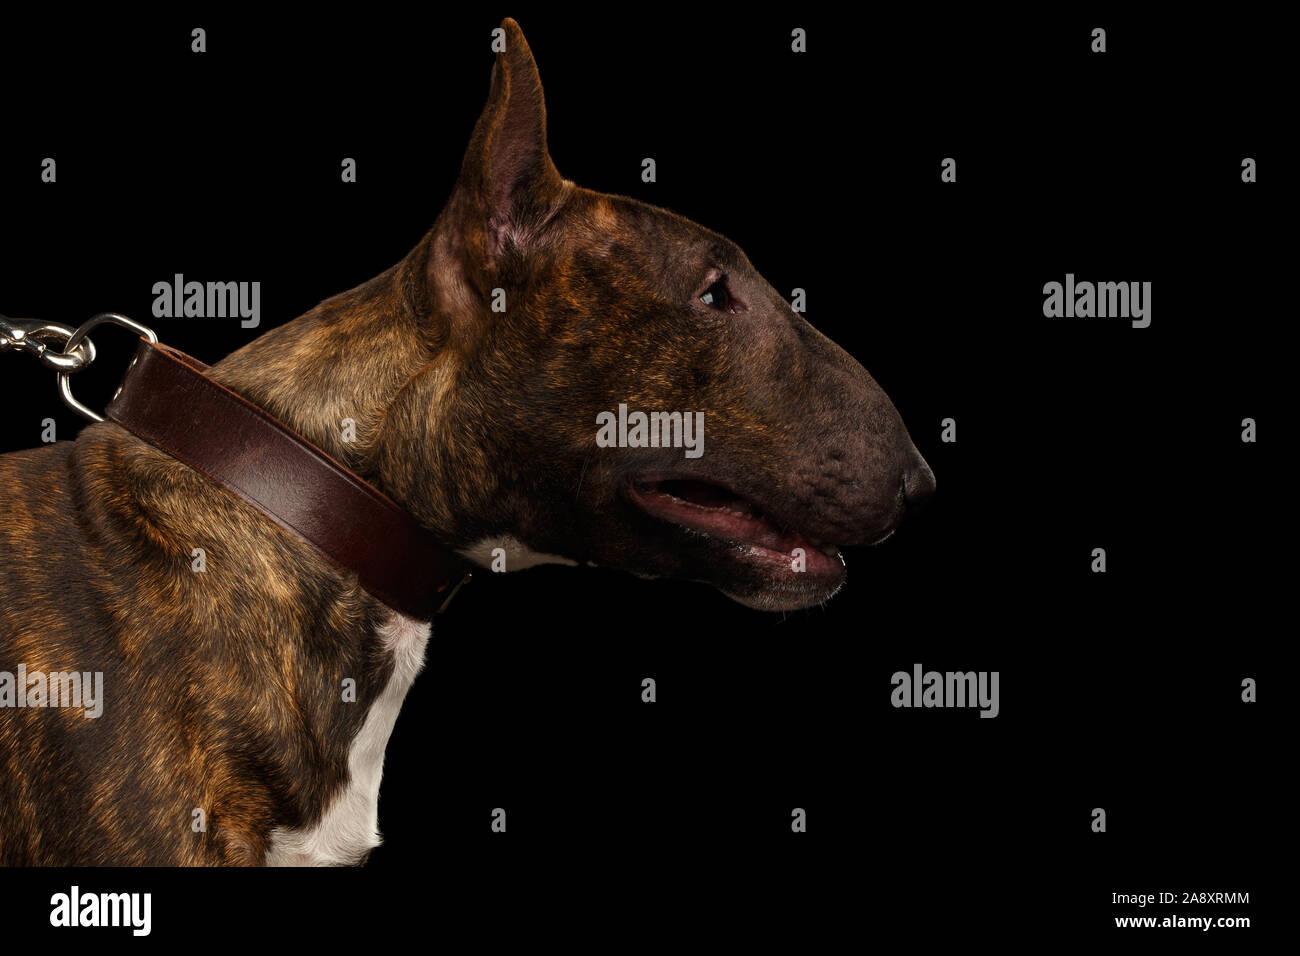 Portrait of Bull Terrier Dog on hold collar on isolated black background, profile view Stock Photo